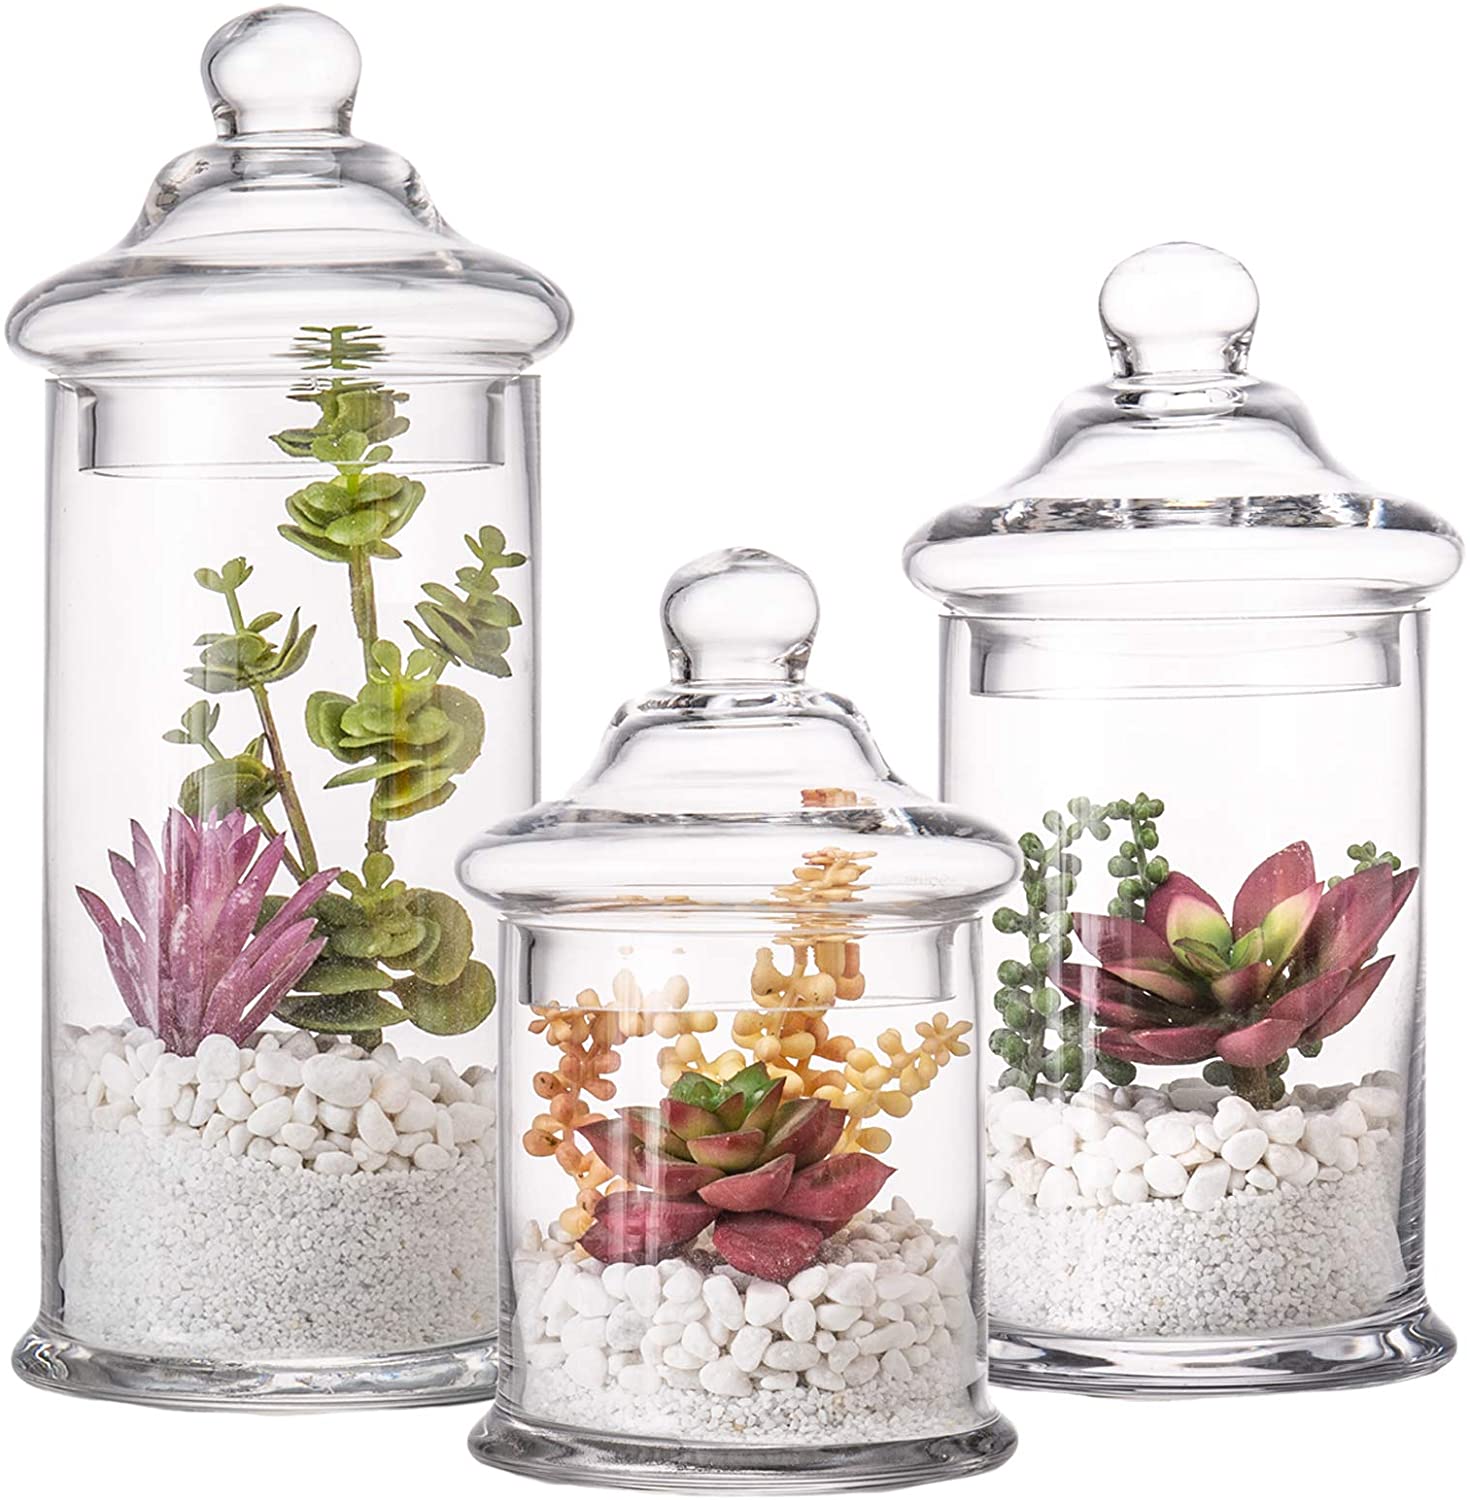 Glass Apothecary Jars with Lids - Set of 3 - Bathroom Storage